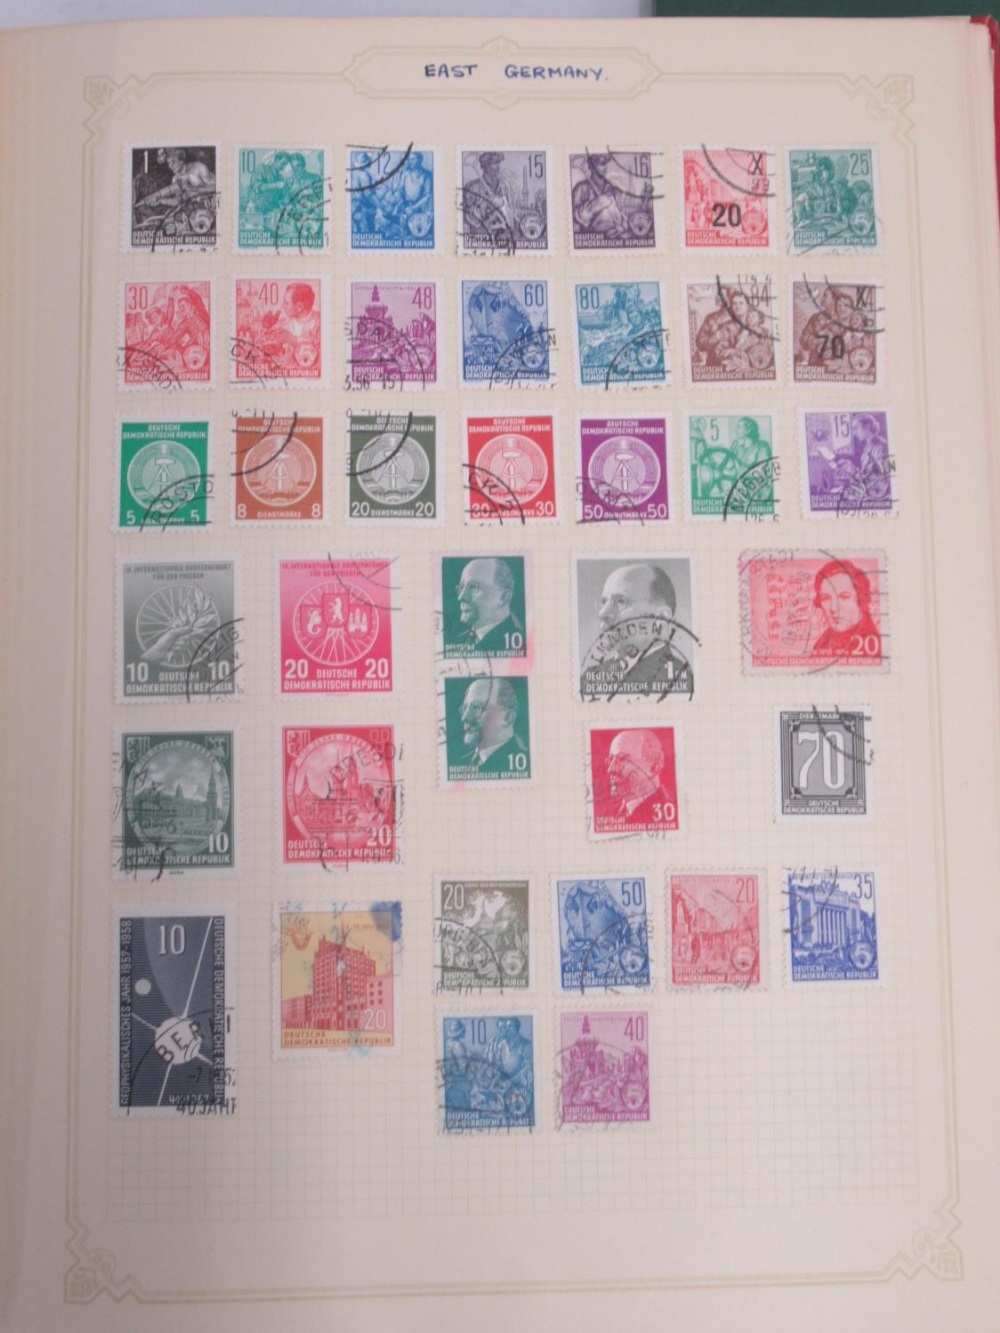 Stamp album cont. Polish stamps, stamp album of French Stamps, a folder cont. stamps and postcards - Image 14 of 24